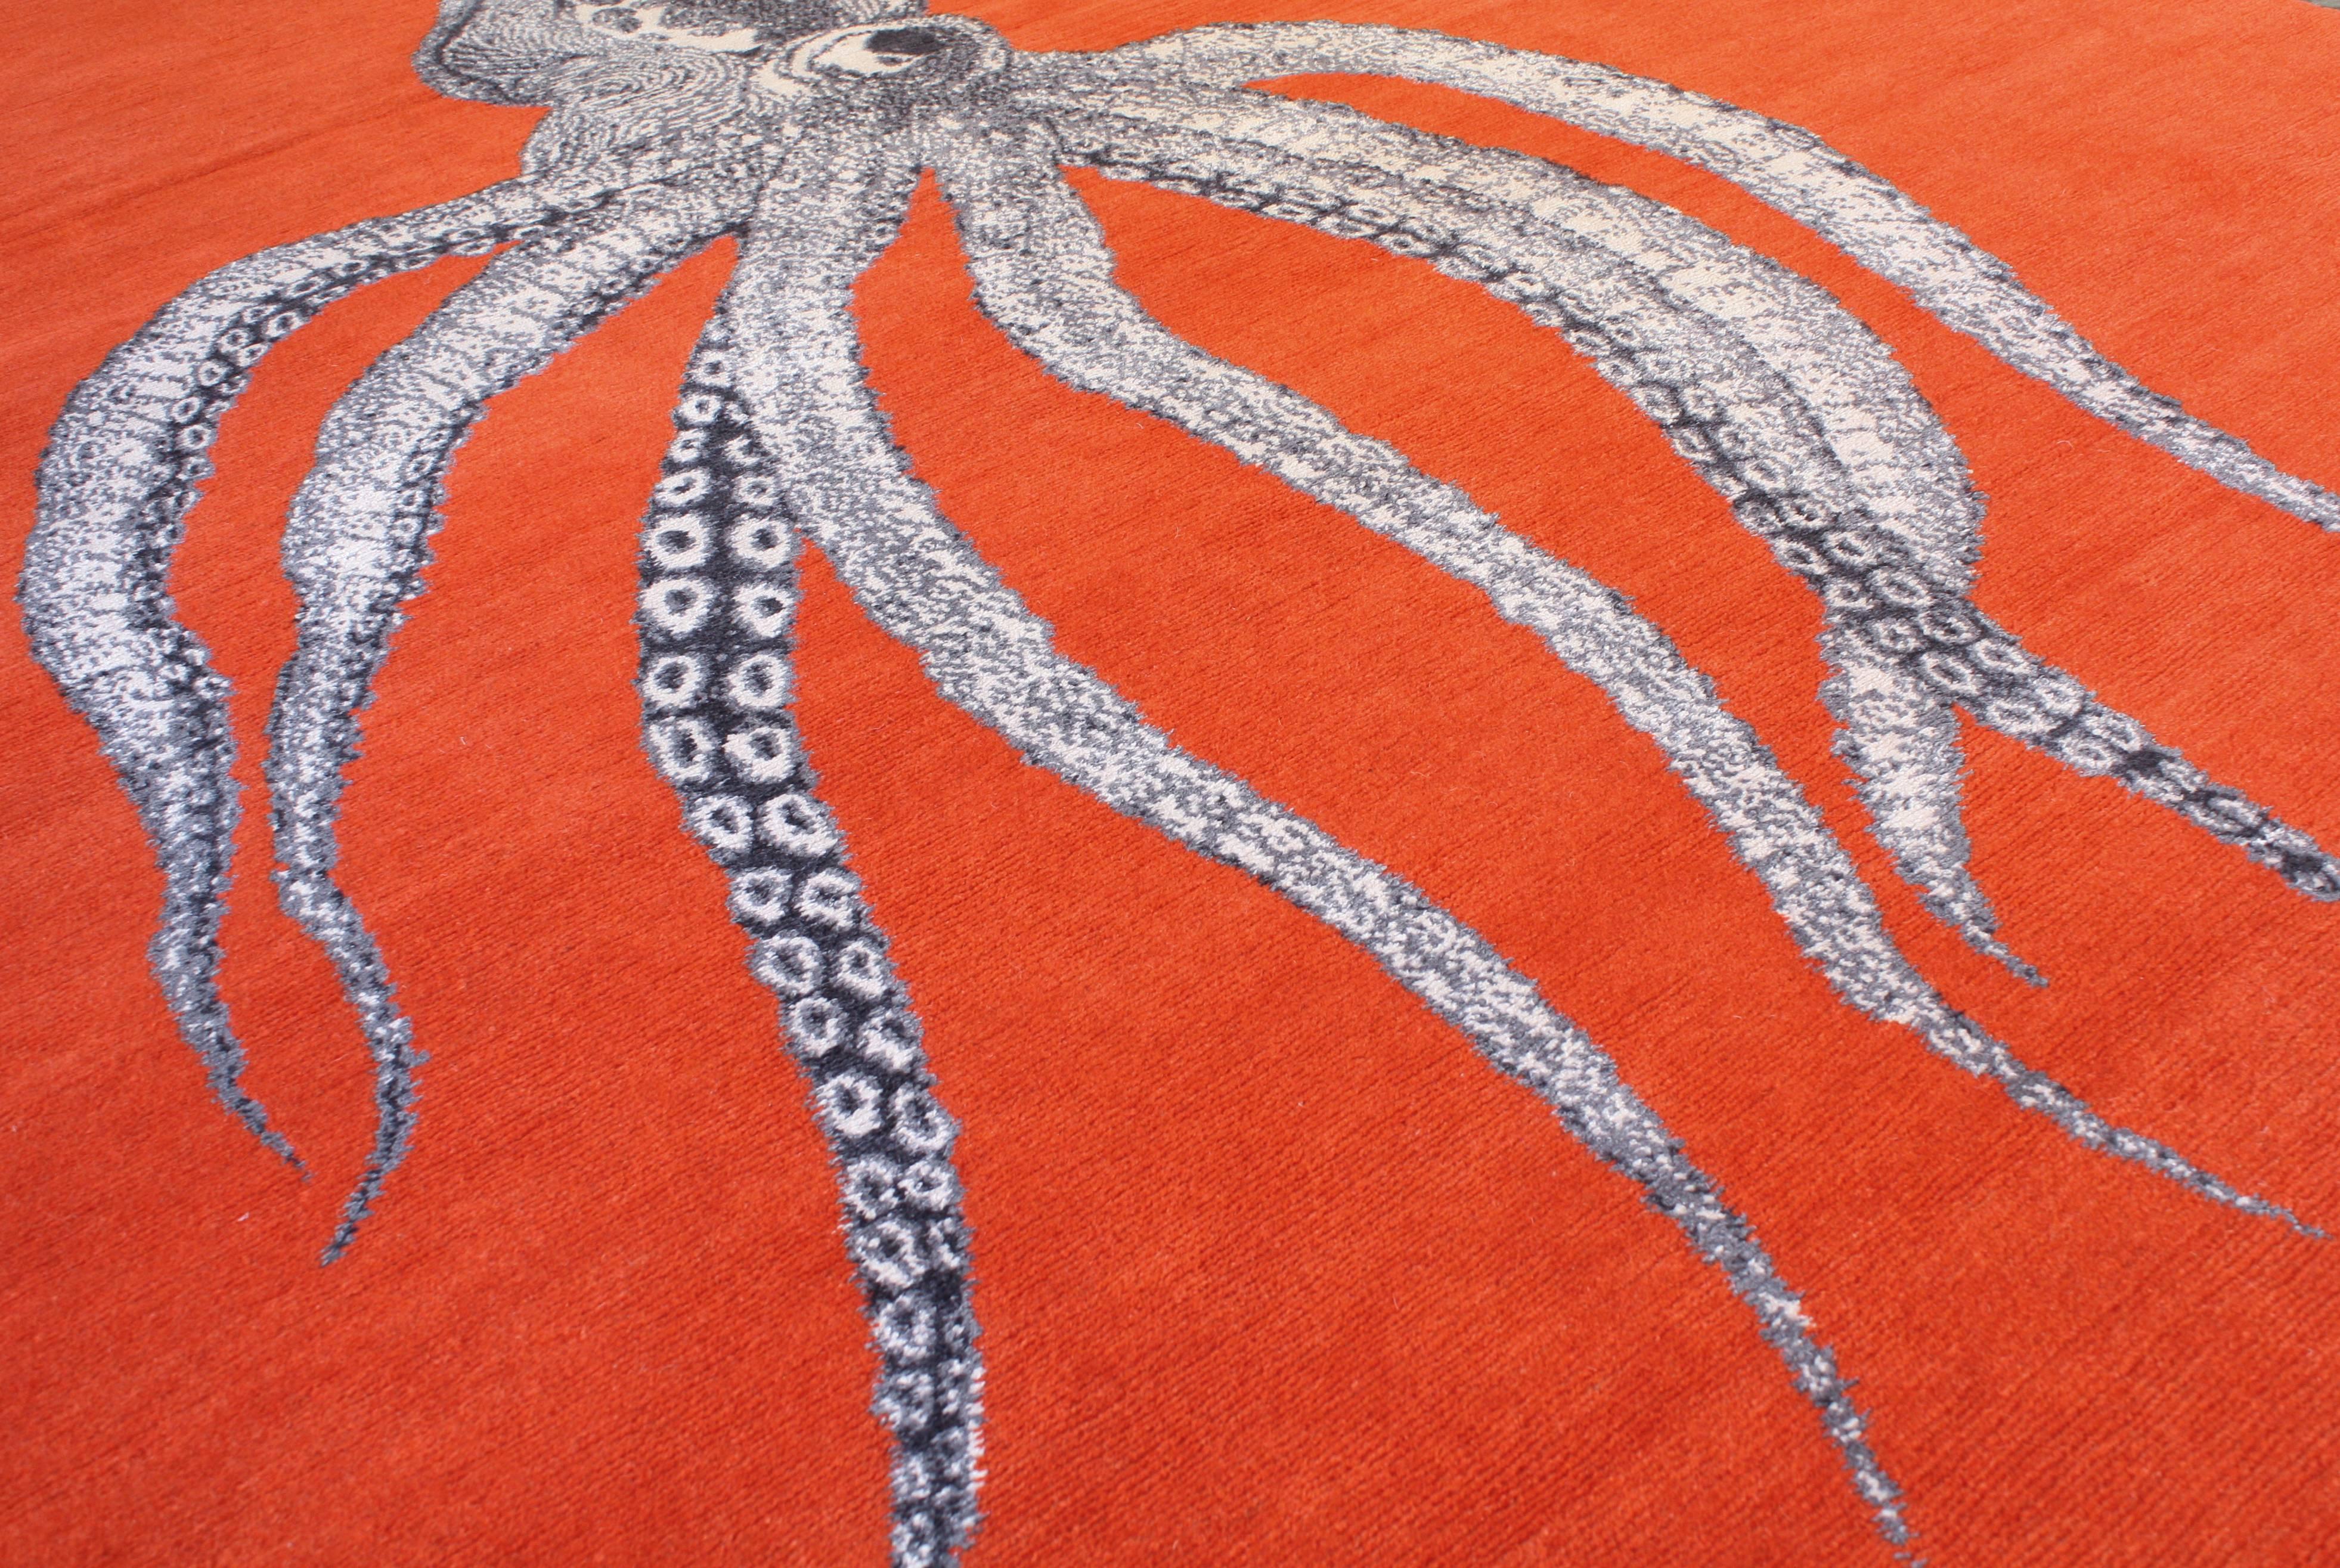 6x9 hand-knotted highland wool and high grade silk rug. 'Inky' is a part of our Graffiti Collaboration. While roaming the streets of NYC Joseph Carini came across a graffiti wall with this octopus design and immediately knew he wanted to create a